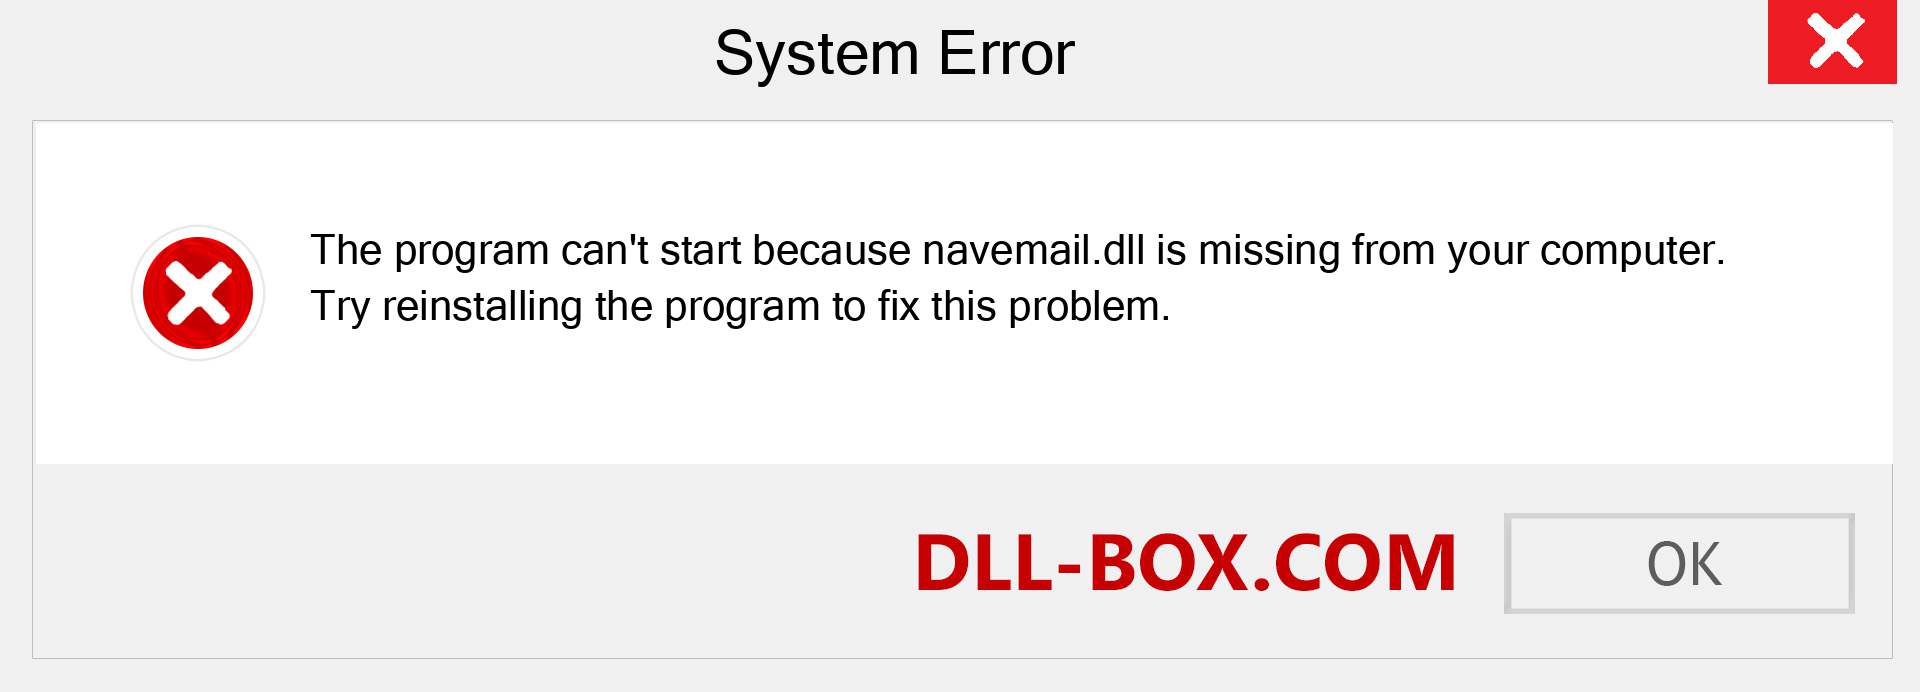  navemail.dll file is missing?. Download for Windows 7, 8, 10 - Fix  navemail dll Missing Error on Windows, photos, images